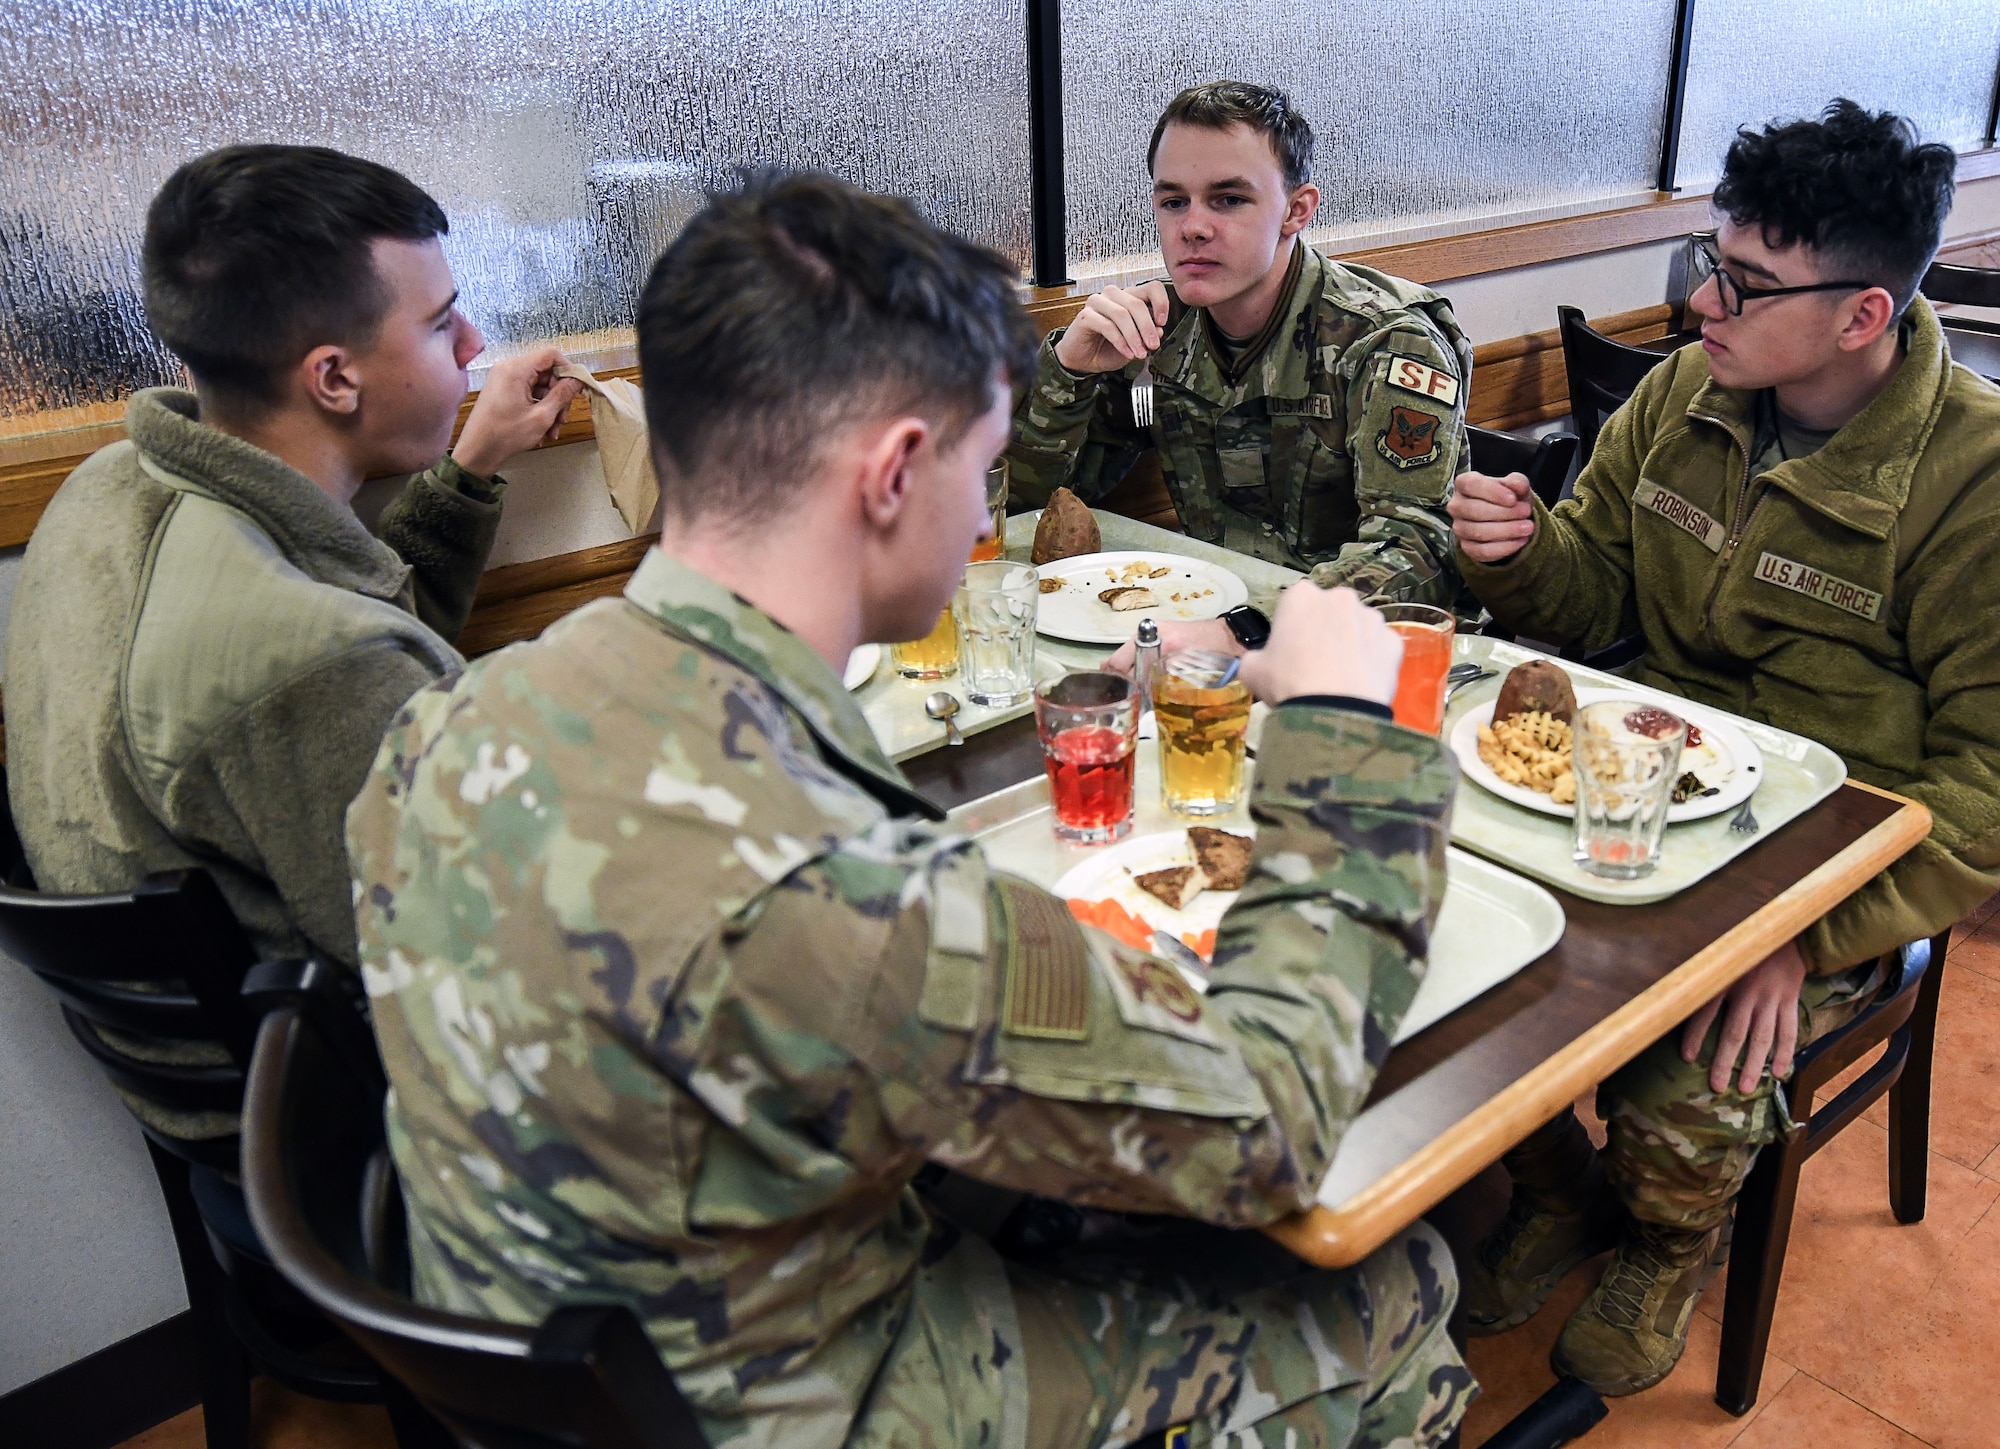 Four uniformed personnel eating lunch at the dining facility.